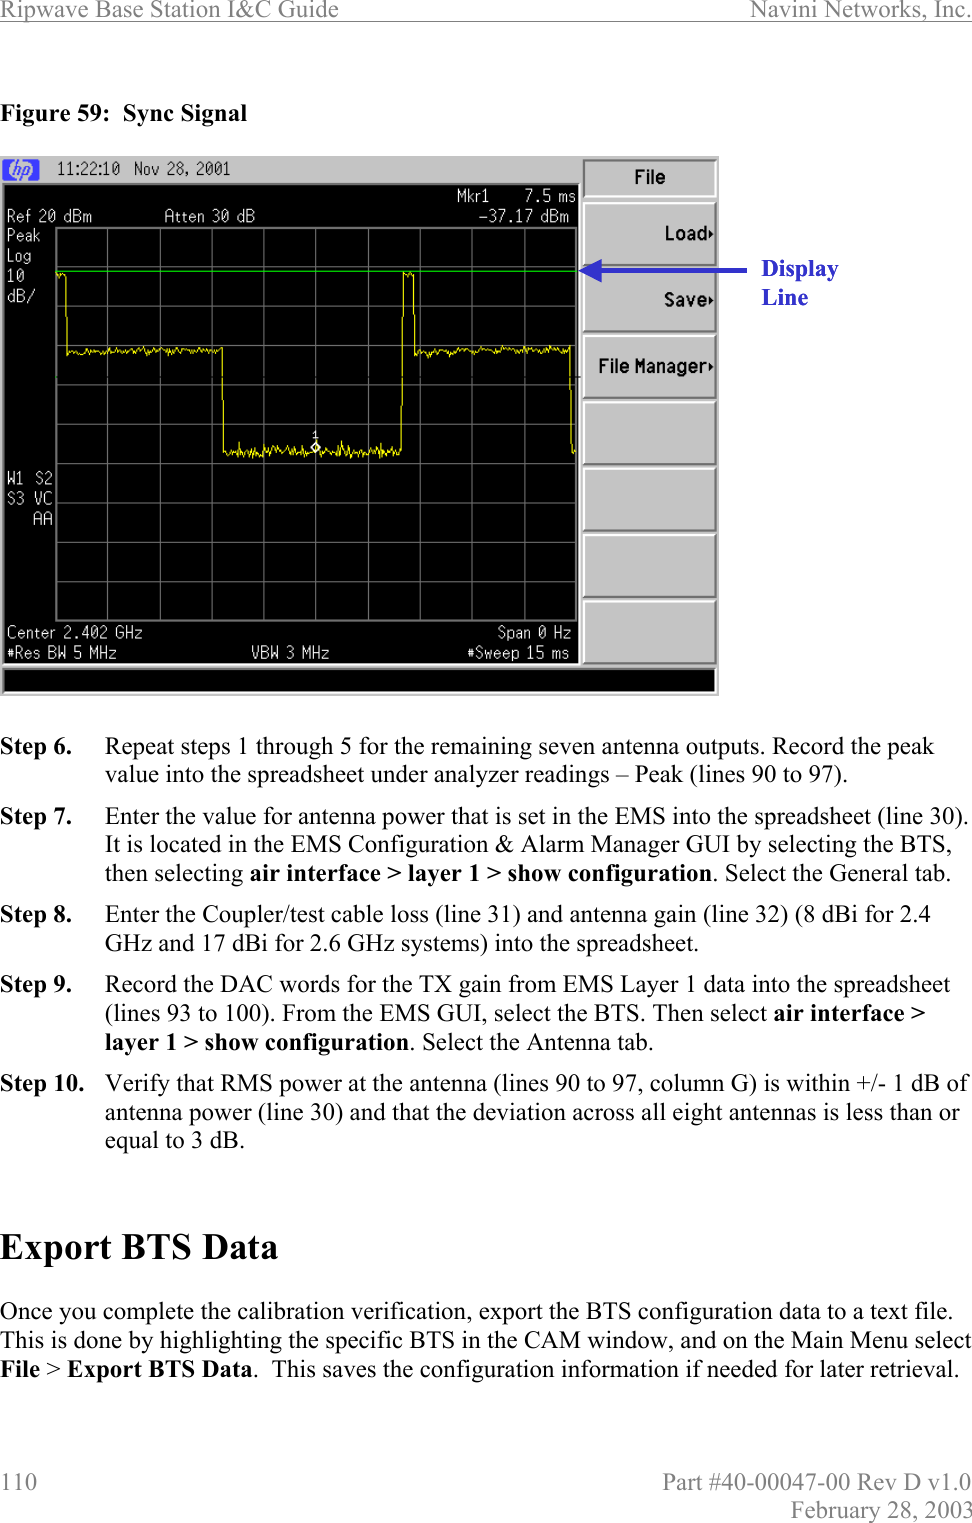 Ripwave Base Station I&amp;C Guide                      Navini Networks, Inc. 110                          Part #40-00047-00 Rev D v1.0 February 28, 2003  Figure 59:  Sync Signal                      Step 6.  Repeat steps 1 through 5 for the remaining seven antenna outputs. Record the peak value into the spreadsheet under analyzer readings – Peak (lines 90 to 97). Step 7.  Enter the value for antenna power that is set in the EMS into the spreadsheet (line 30). It is located in the EMS Configuration &amp; Alarm Manager GUI by selecting the BTS, then selecting air interface &gt; layer 1 &gt; show configuration. Select the General tab. Step 8.  Enter the Coupler/test cable loss (line 31) and antenna gain (line 32) (8 dBi for 2.4 GHz and 17 dBi for 2.6 GHz systems) into the spreadsheet. Step 9.  Record the DAC words for the TX gain from EMS Layer 1 data into the spreadsheet (lines 93 to 100). From the EMS GUI, select the BTS. Then select air interface &gt; layer 1 &gt; show configuration. Select the Antenna tab. Step 10.  Verify that RMS power at the antenna (lines 90 to 97, column G) is within +/- 1 dB of antenna power (line 30) and that the deviation across all eight antennas is less than or equal to 3 dB.   Export BTS Data  Once you complete the calibration verification, export the BTS configuration data to a text file. This is done by highlighting the specific BTS in the CAM window, and on the Main Menu select File &gt; Export BTS Data.  This saves the configuration information if needed for later retrieval.Display LineDisplay Line